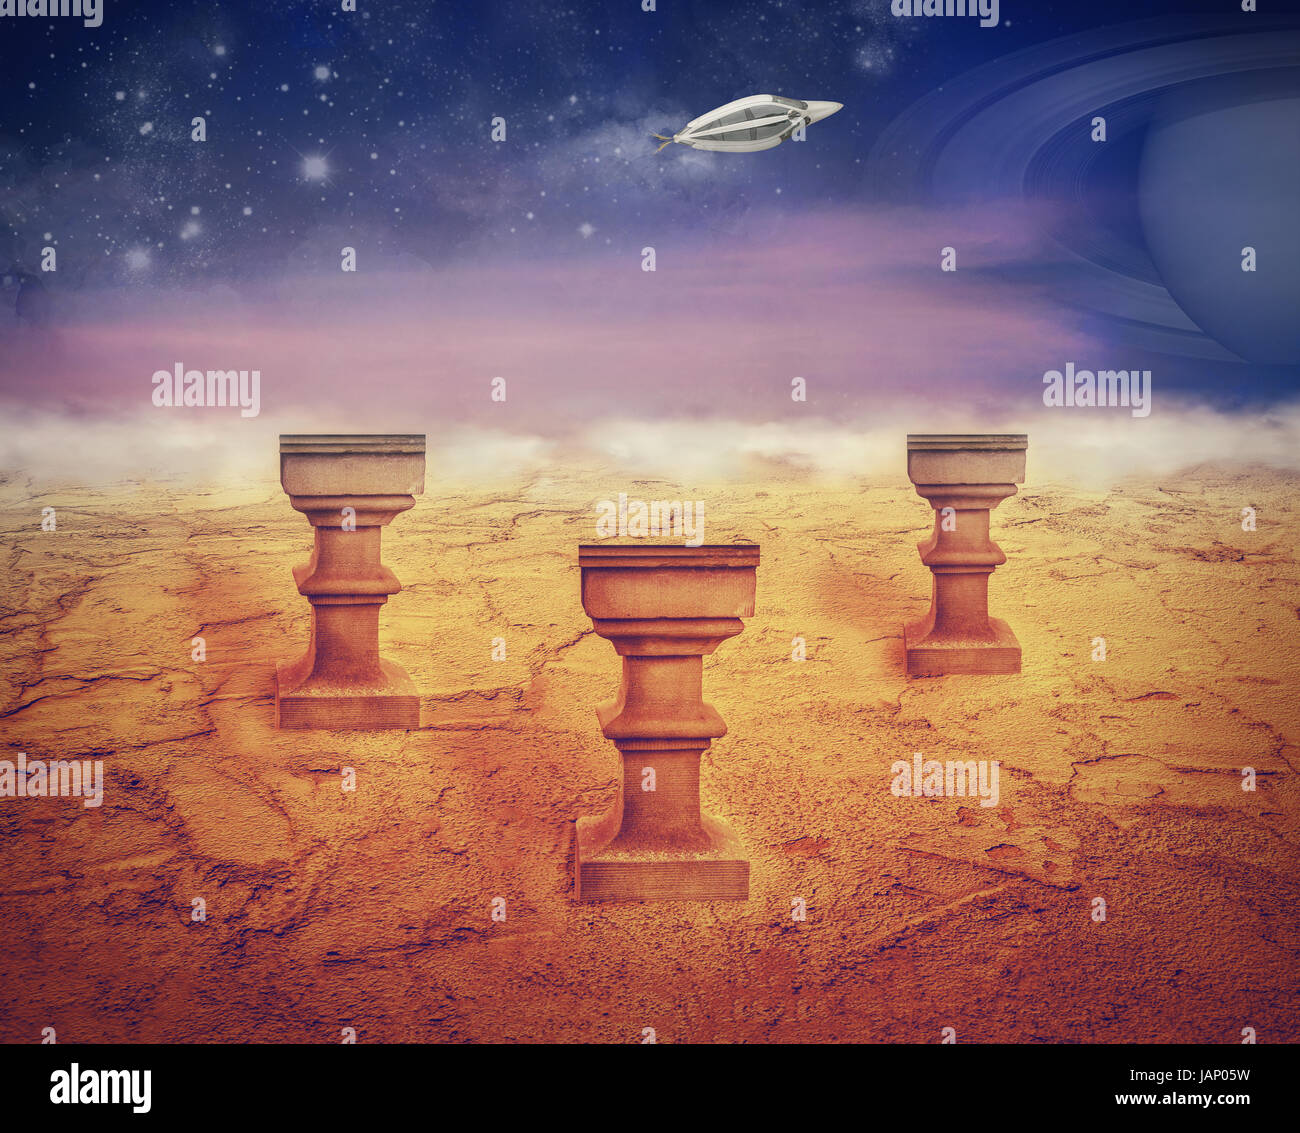 Inspired by the deep of space I've created this Mars landing artwork. Stock Photo